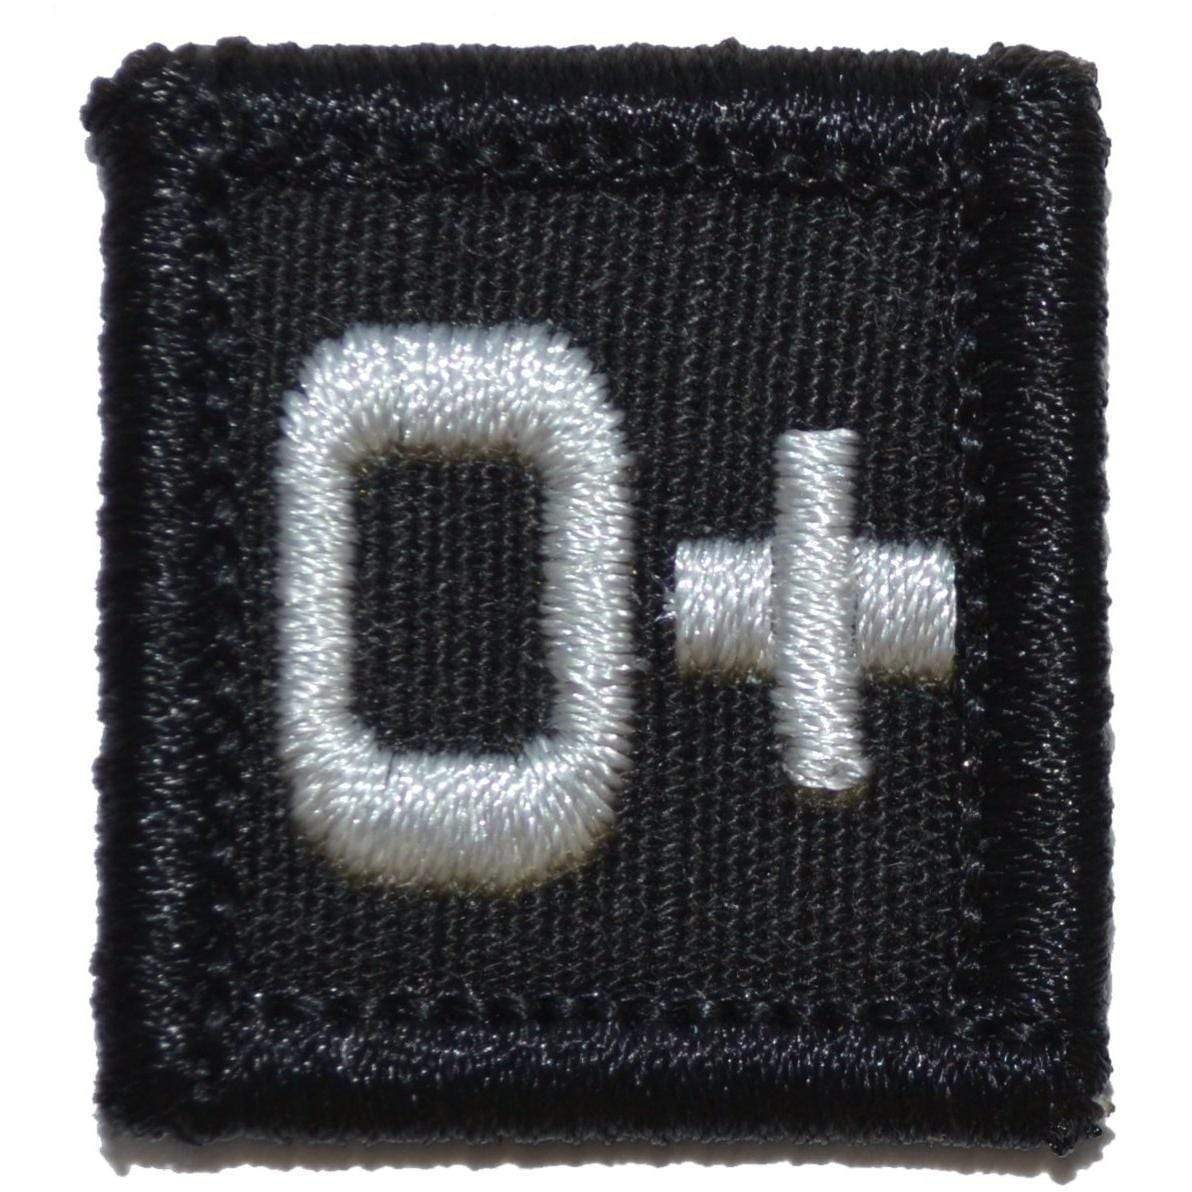 Tactical Gear Junkie Patches Black Blood Type - 1x1 Patch